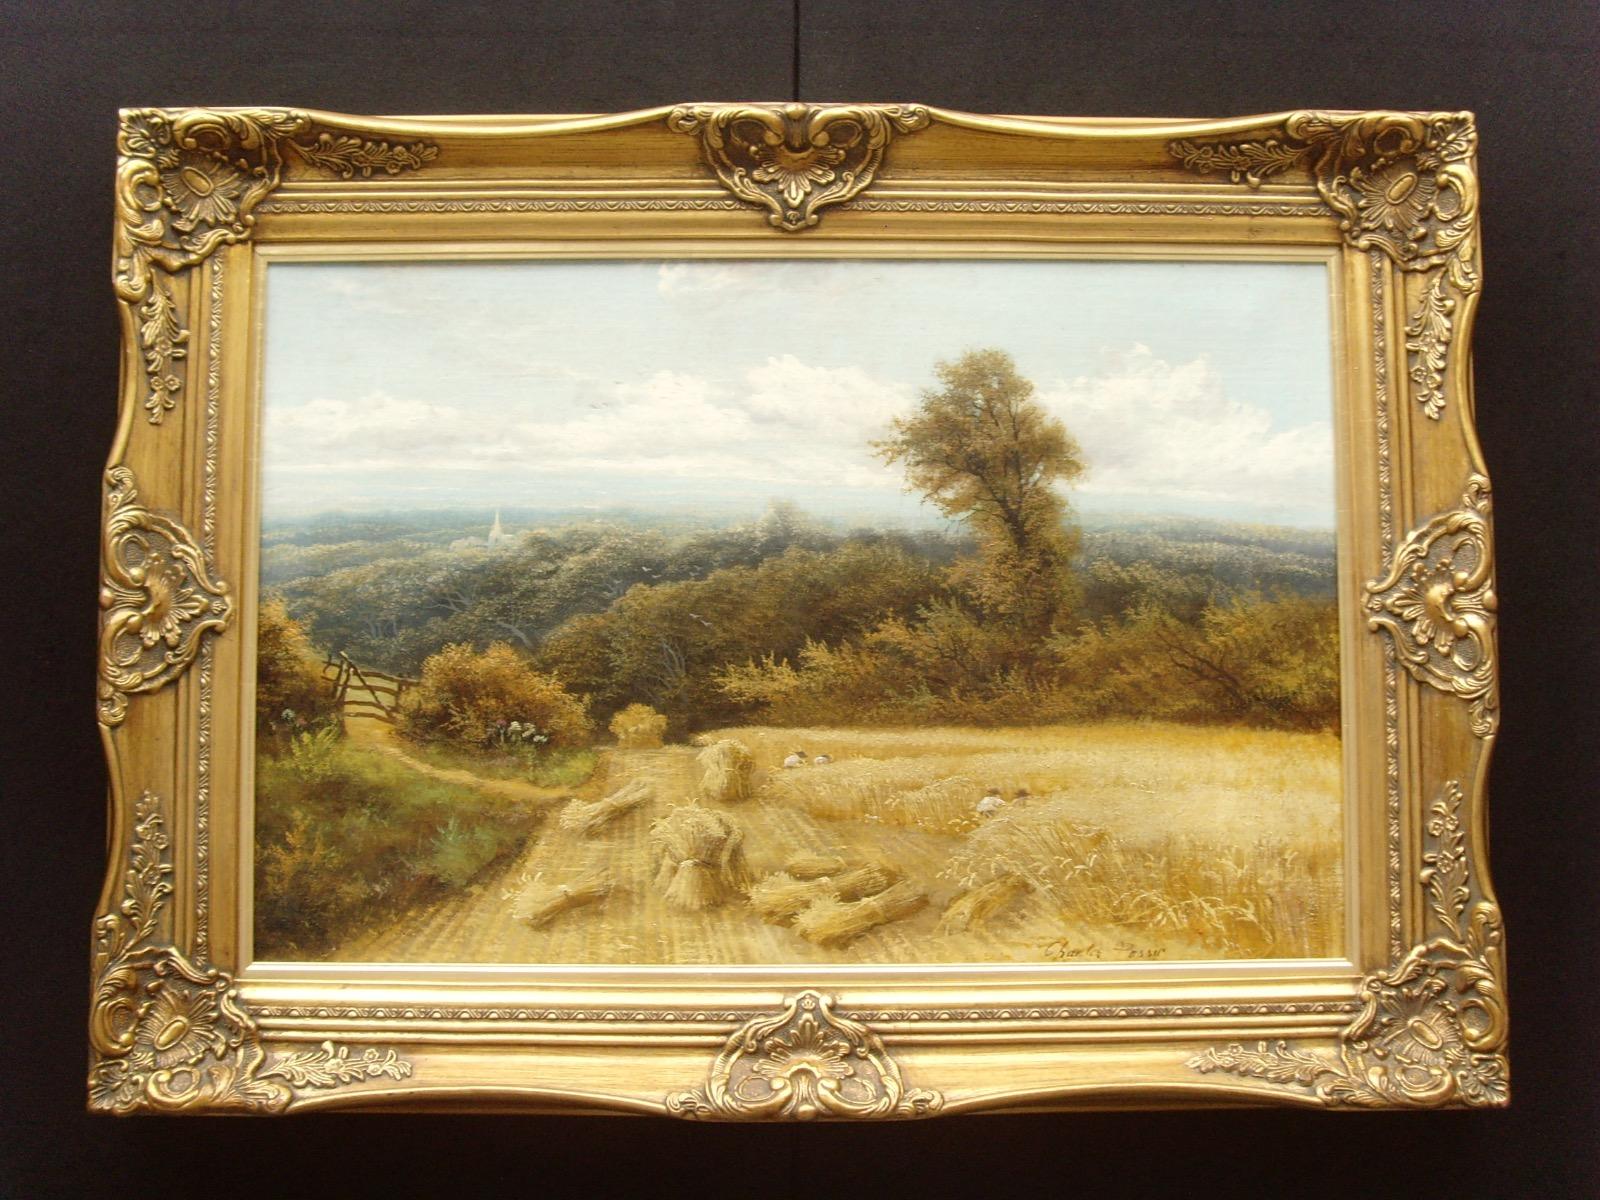 I am delighted to offer for sale this stunning Victorian Painting by the artist Charles Henry Passey (1847-1898) who has signed the painting in the lower right hand corner. This is a fine detailed painting beautifully depicting a panoramic landscape